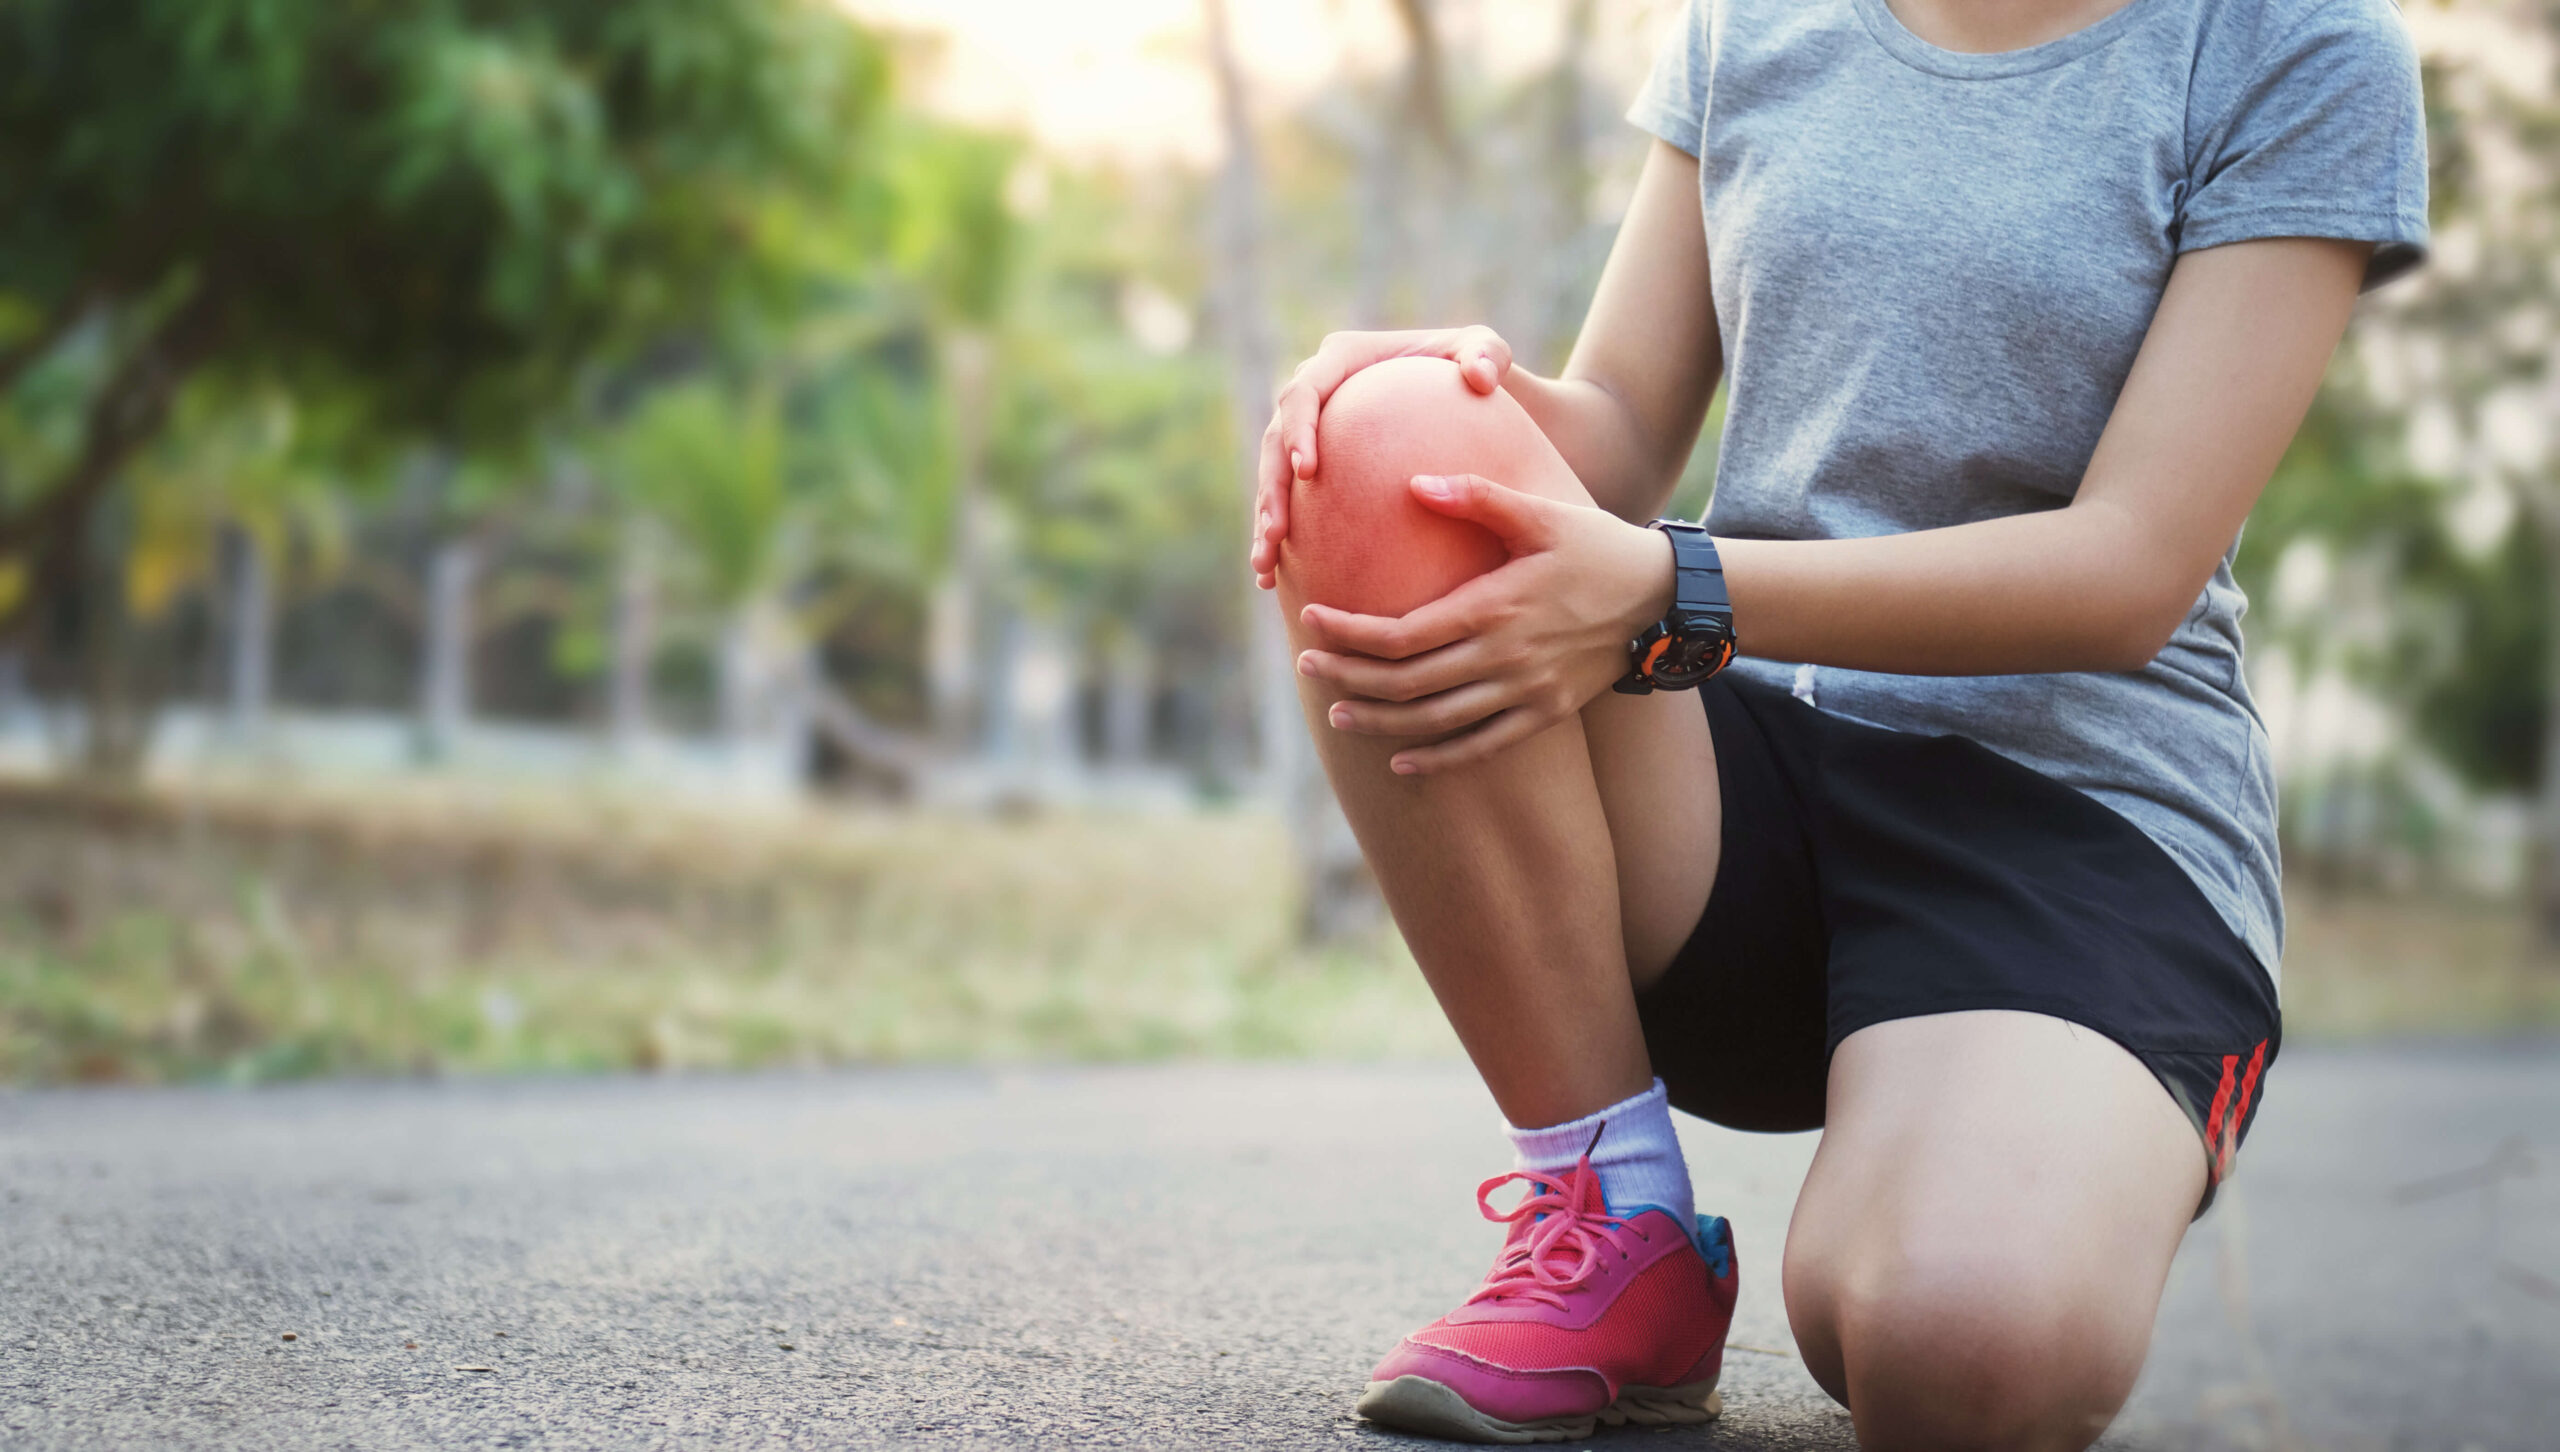 Significance of a hyperextended knee